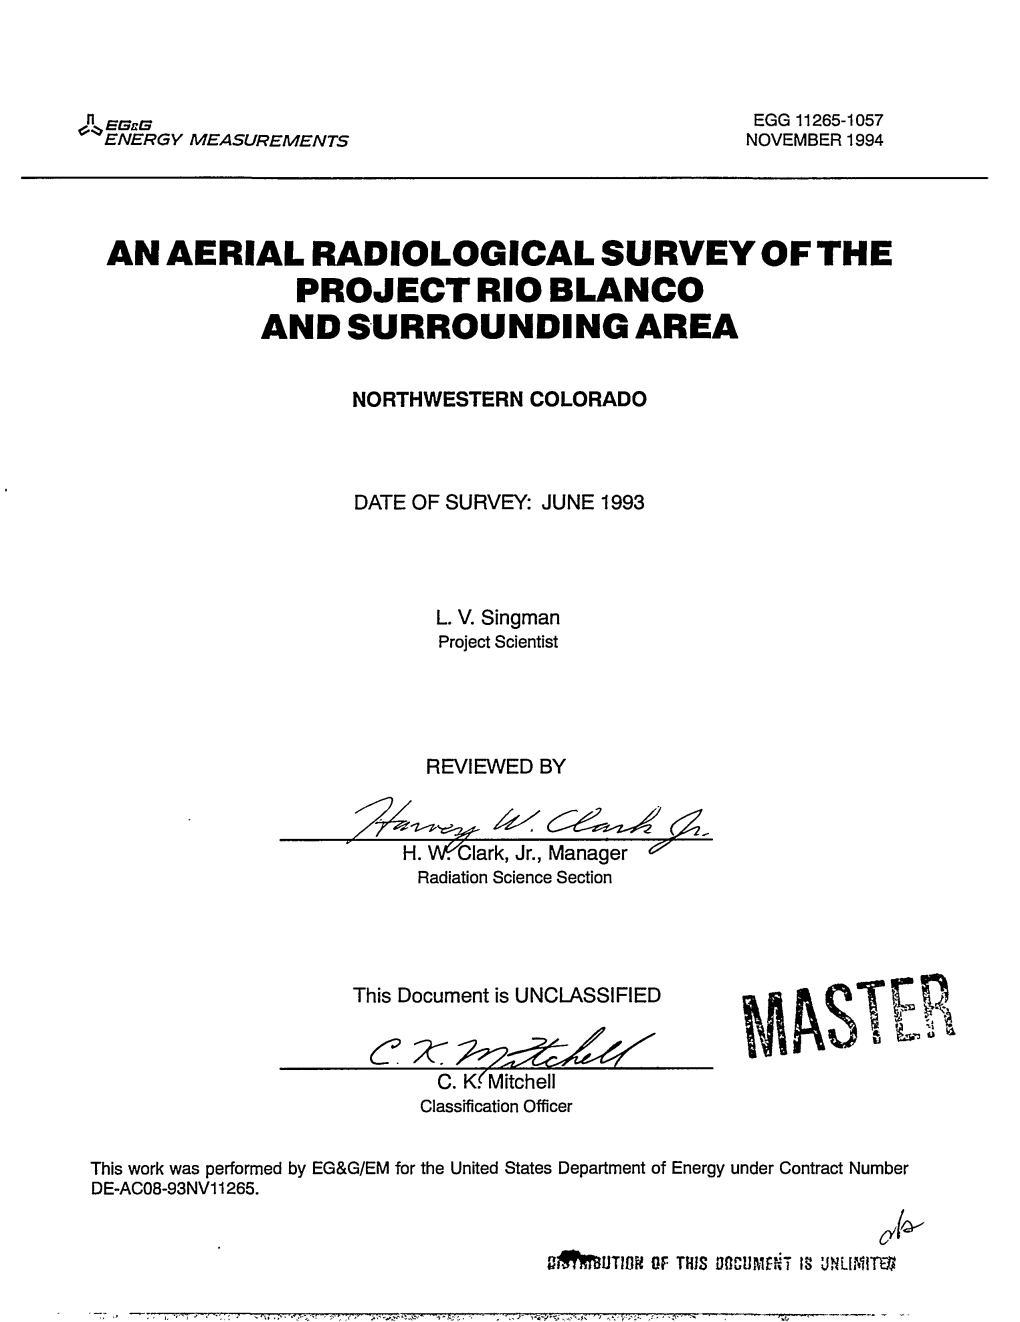 An Aerial Radiological Survey of the Project Rio Blanco and Surrounding Area